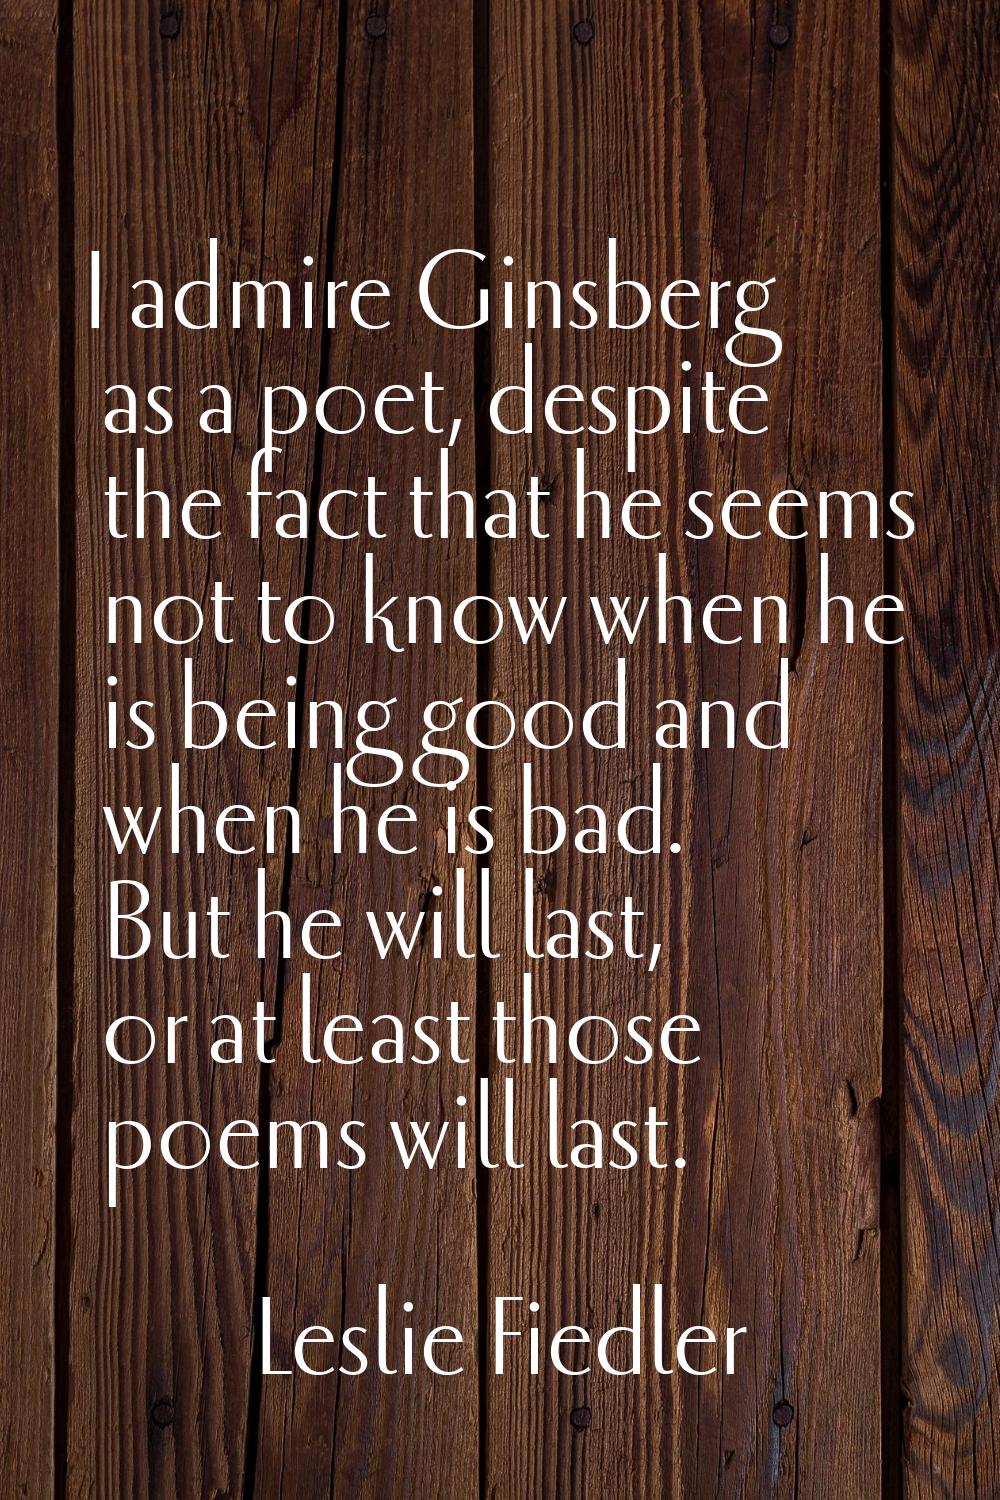 I admire Ginsberg as a poet, despite the fact that he seems not to know when he is being good and w